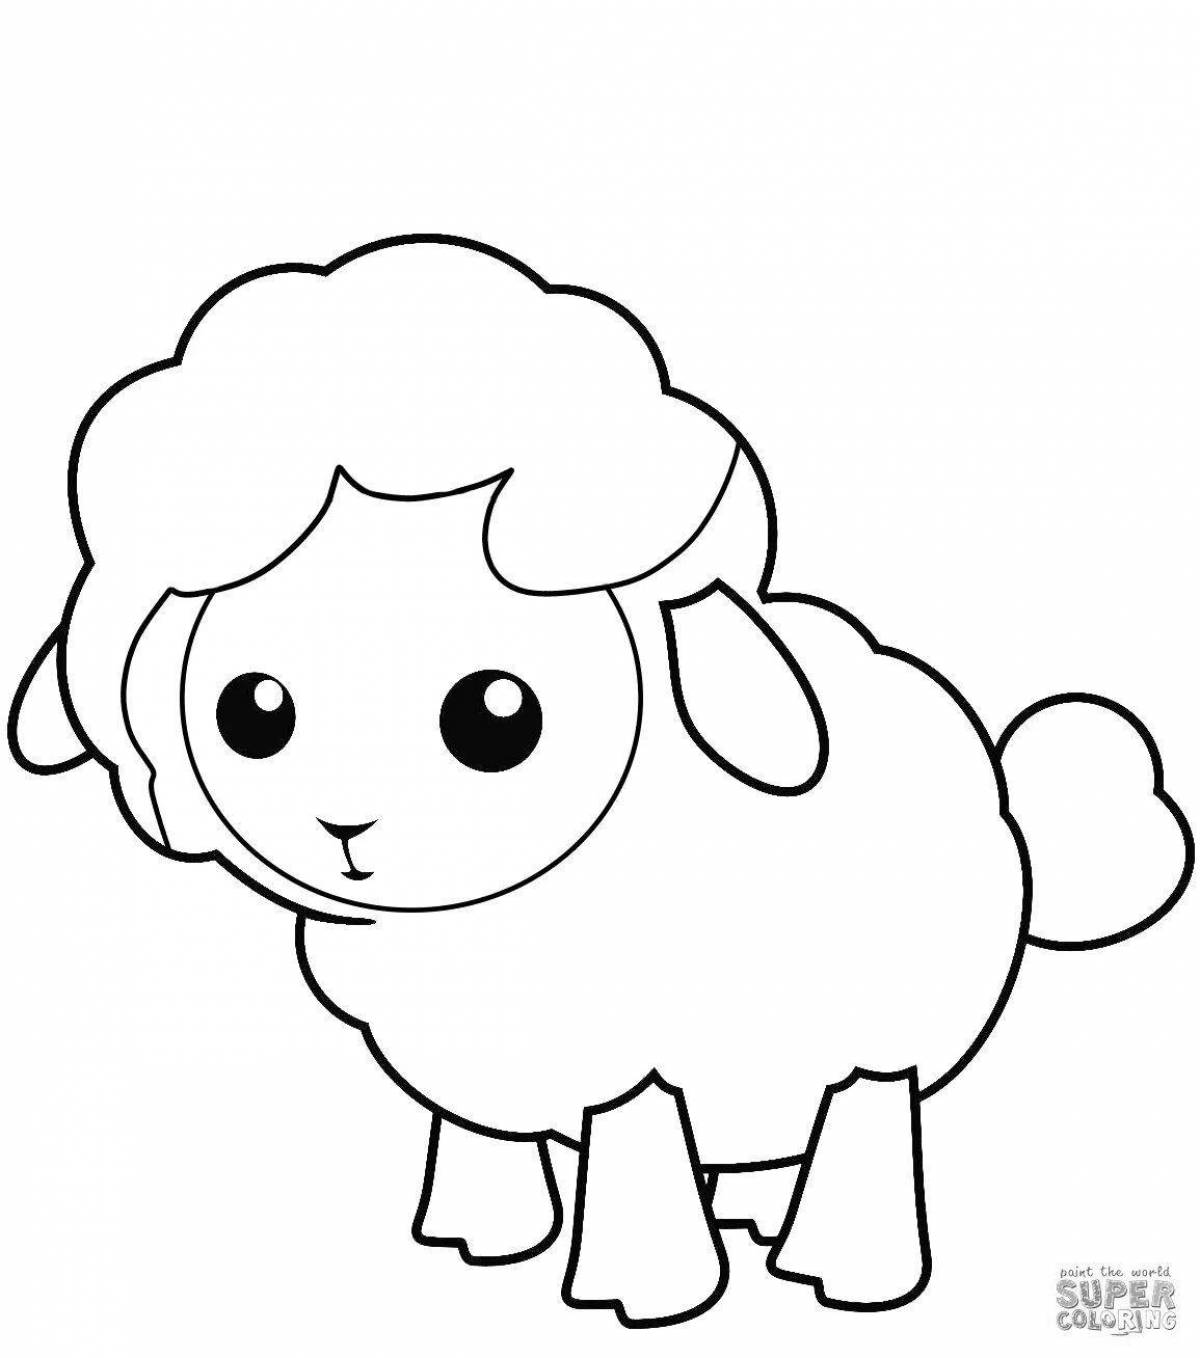 Color explosion suzie the sheep coloring book